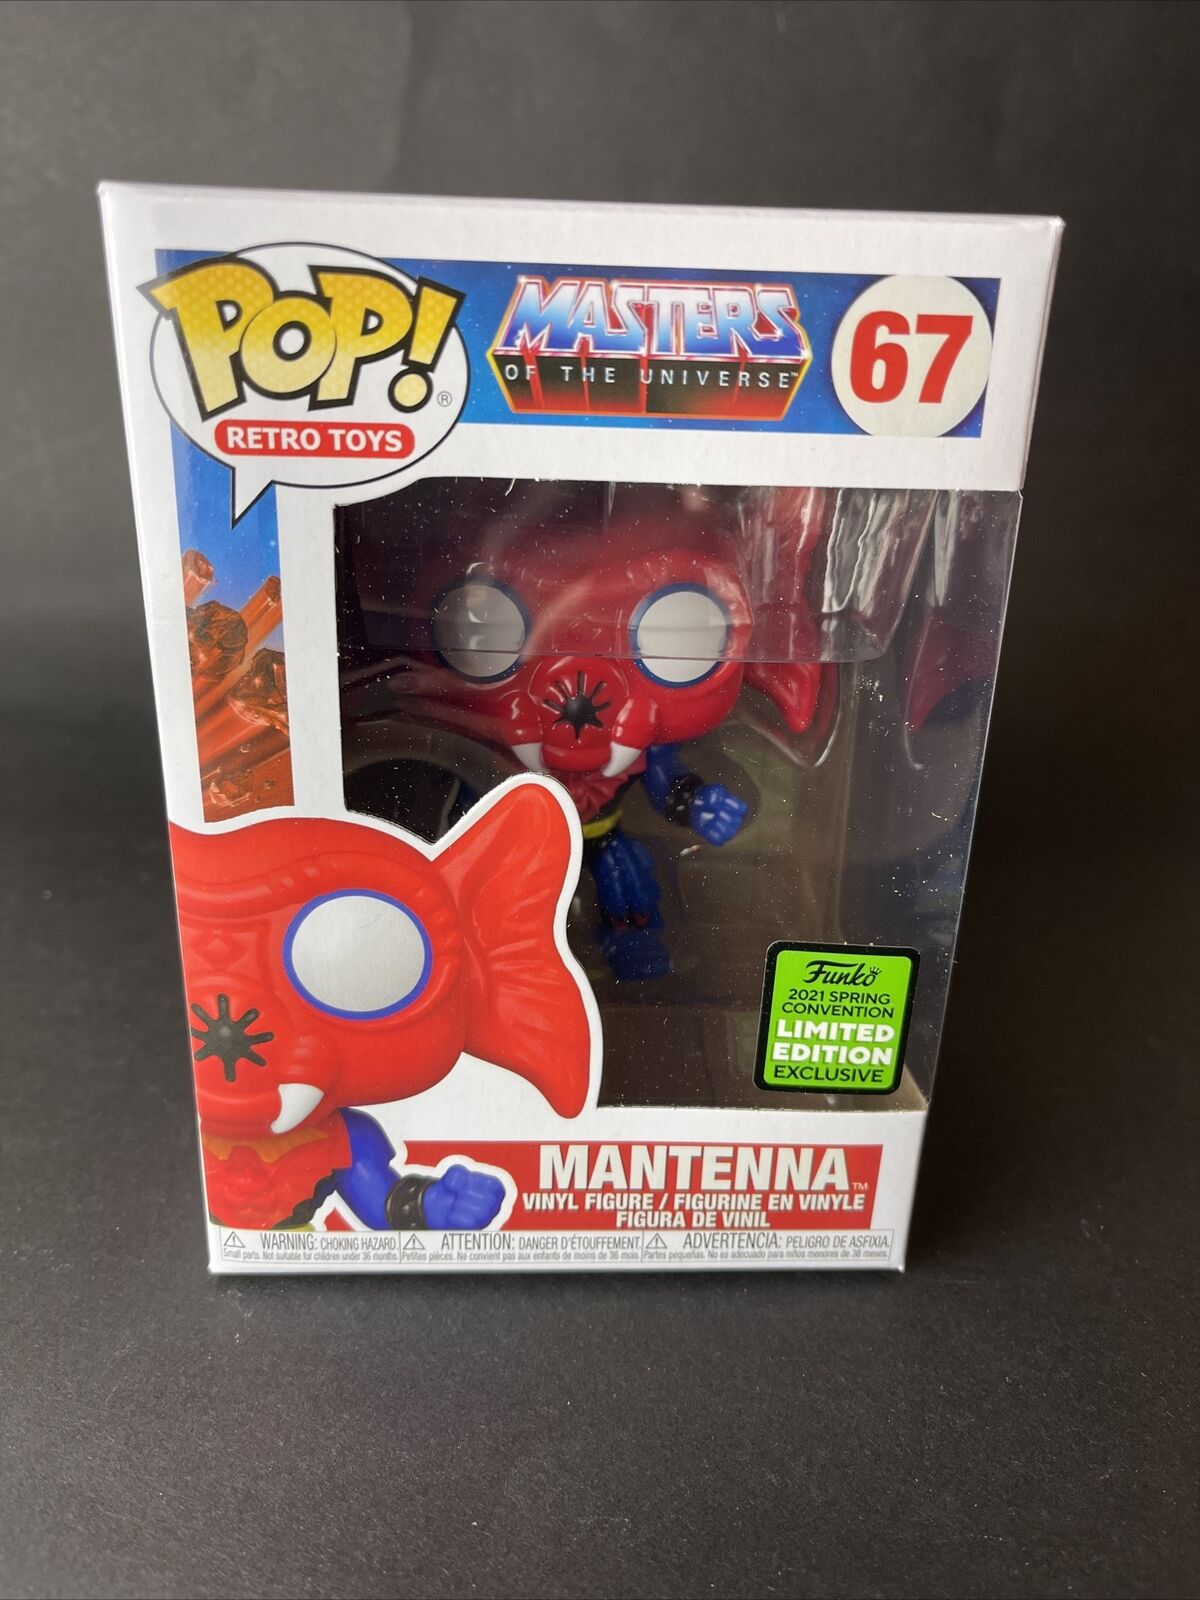 Pop! Masters of the Universe MANTENNA #67 2021 Spring Convention w/protector